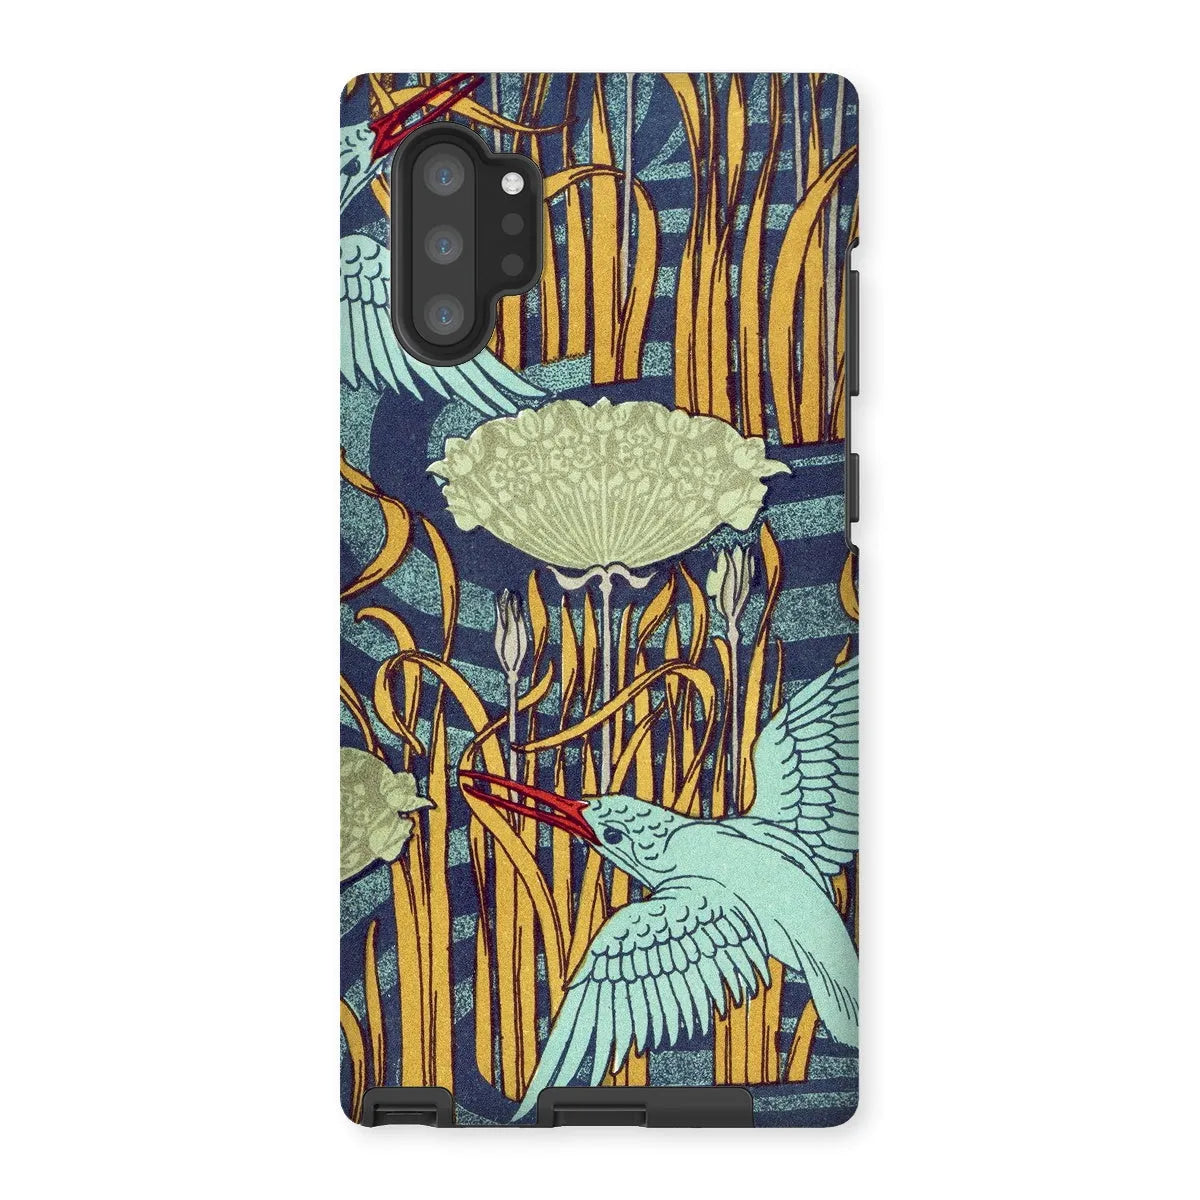 Kingfishers French Art Phone Case - Maurice Pillard Verneuil - Samsung Galaxy Note 10p / Matte - Mobile Phone Cases